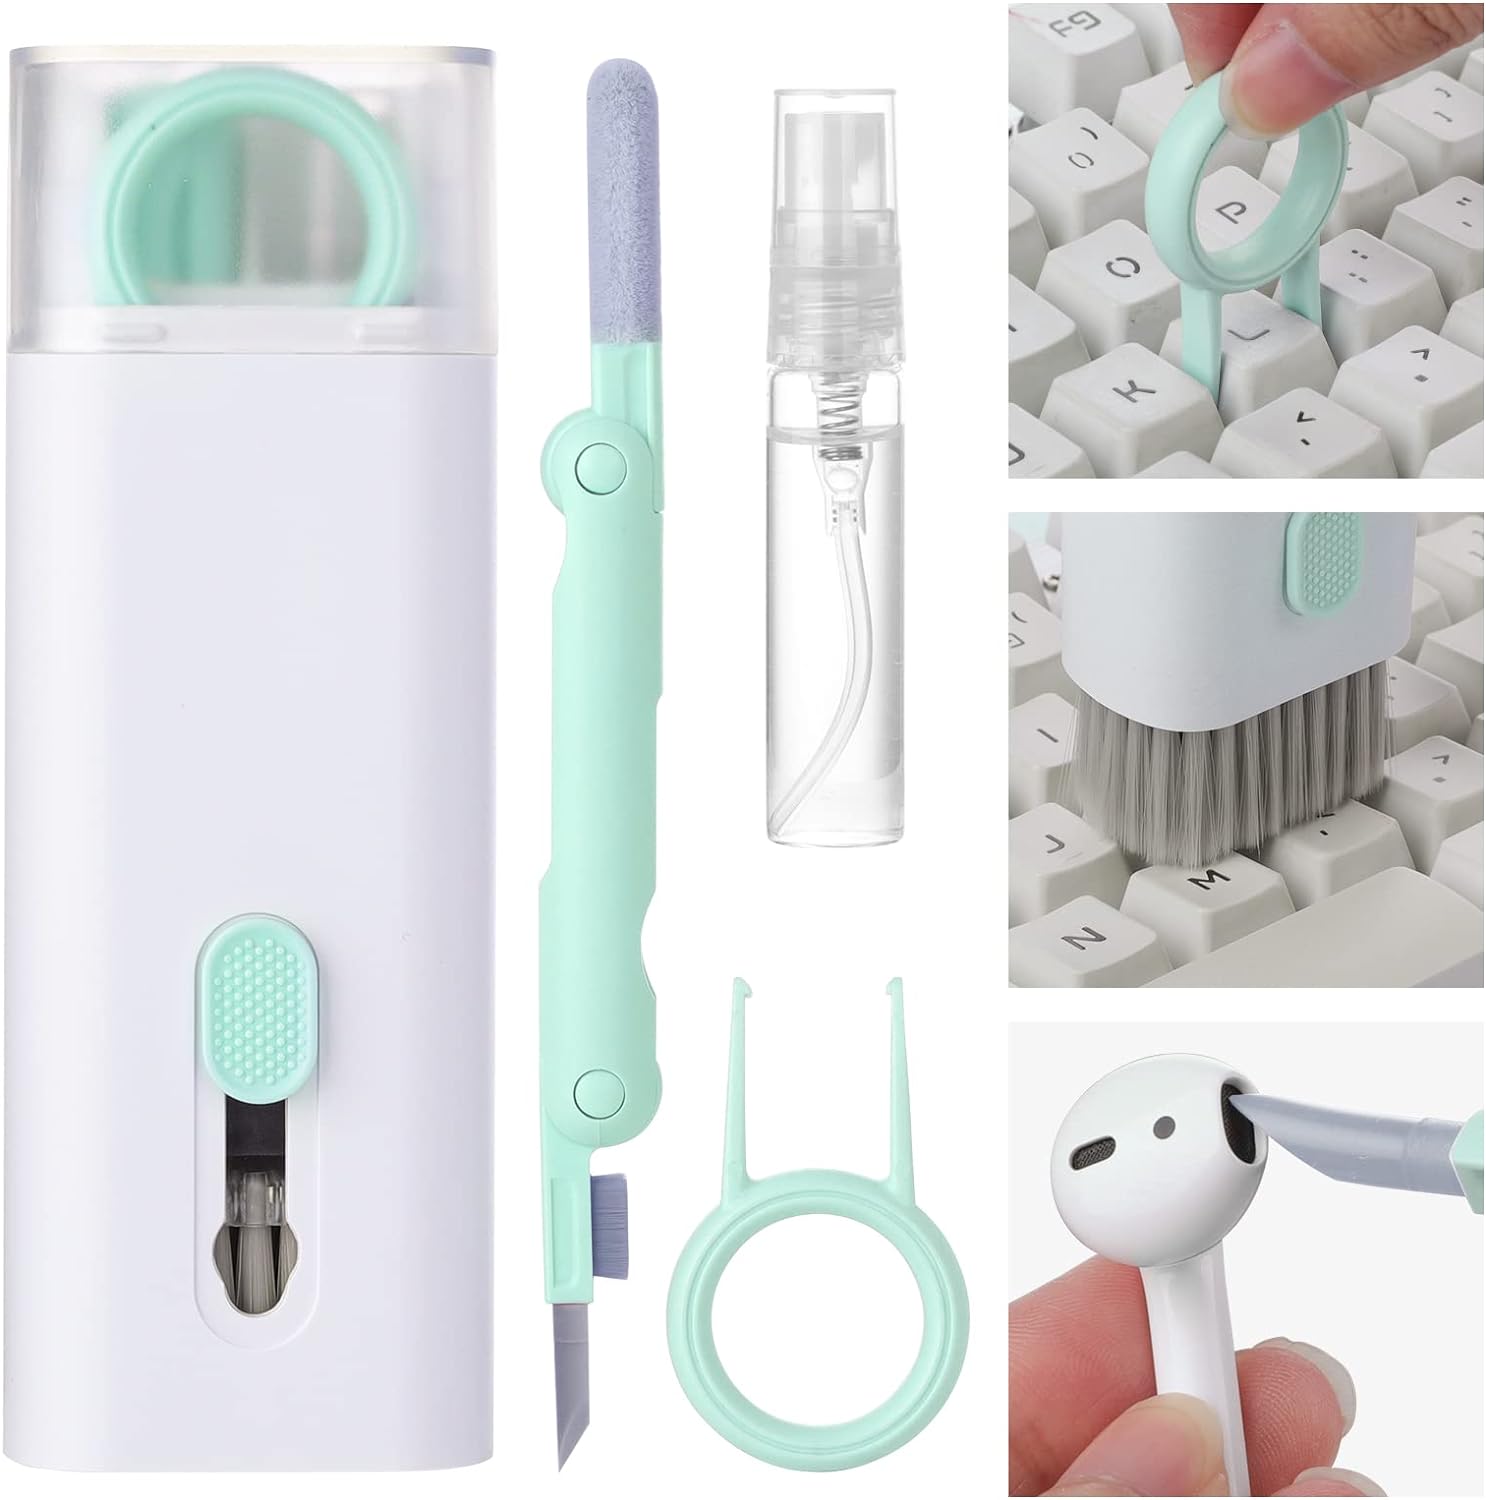 TechSweep Effortless Cleaning Kit for Electronics - Keep Your Devices Pristine!